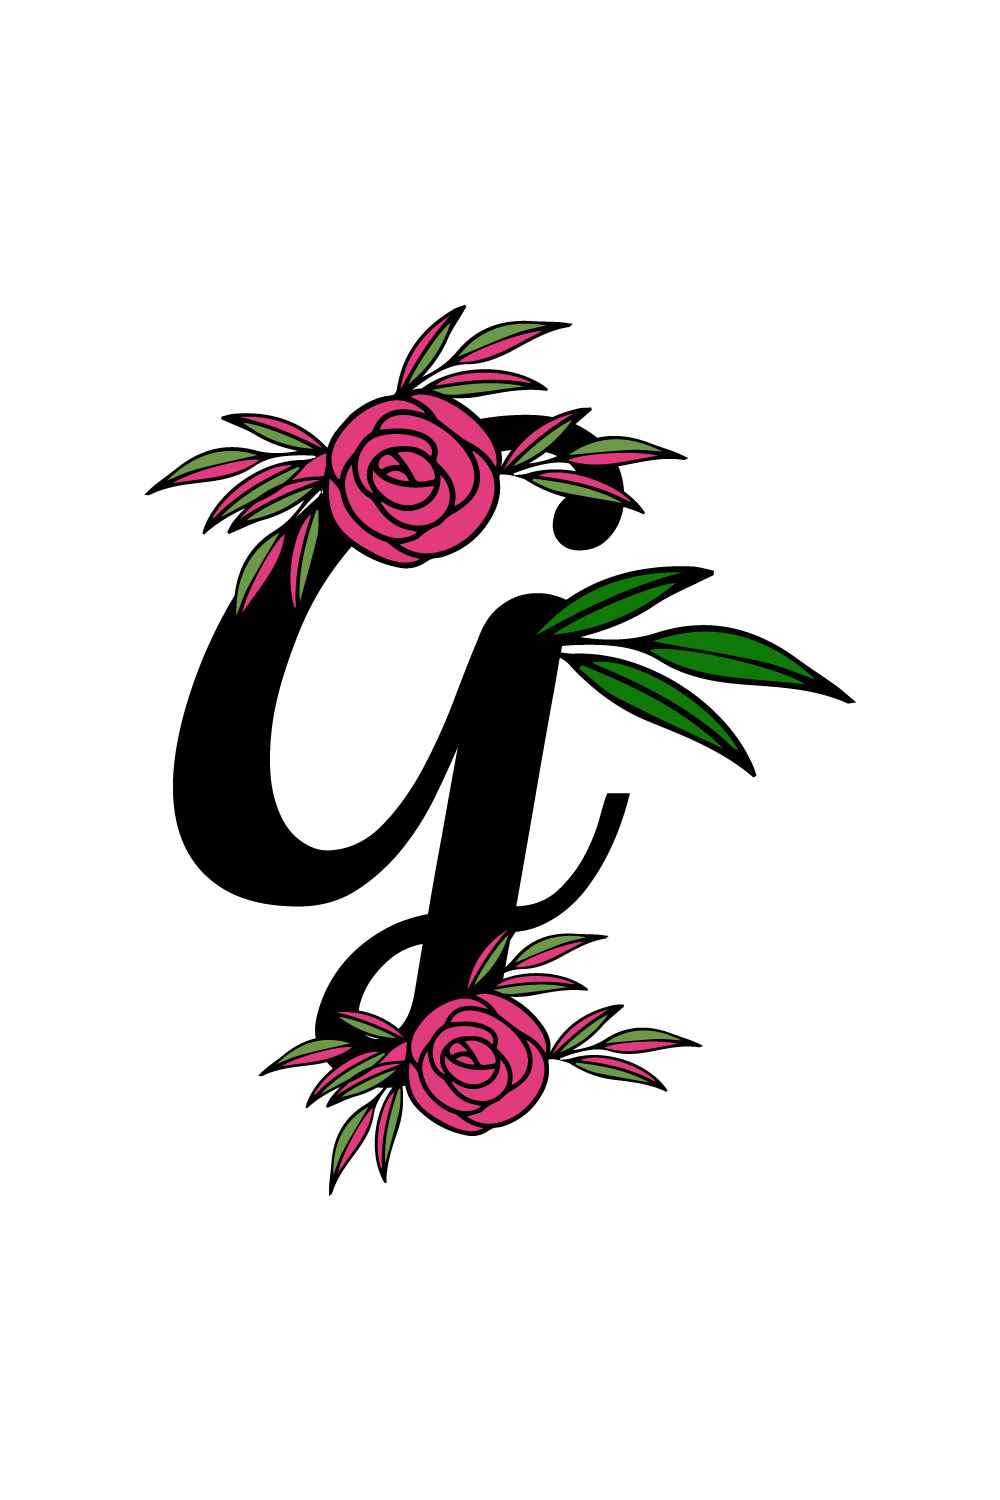 Free Wildflower G letter logo pinterest preview image.